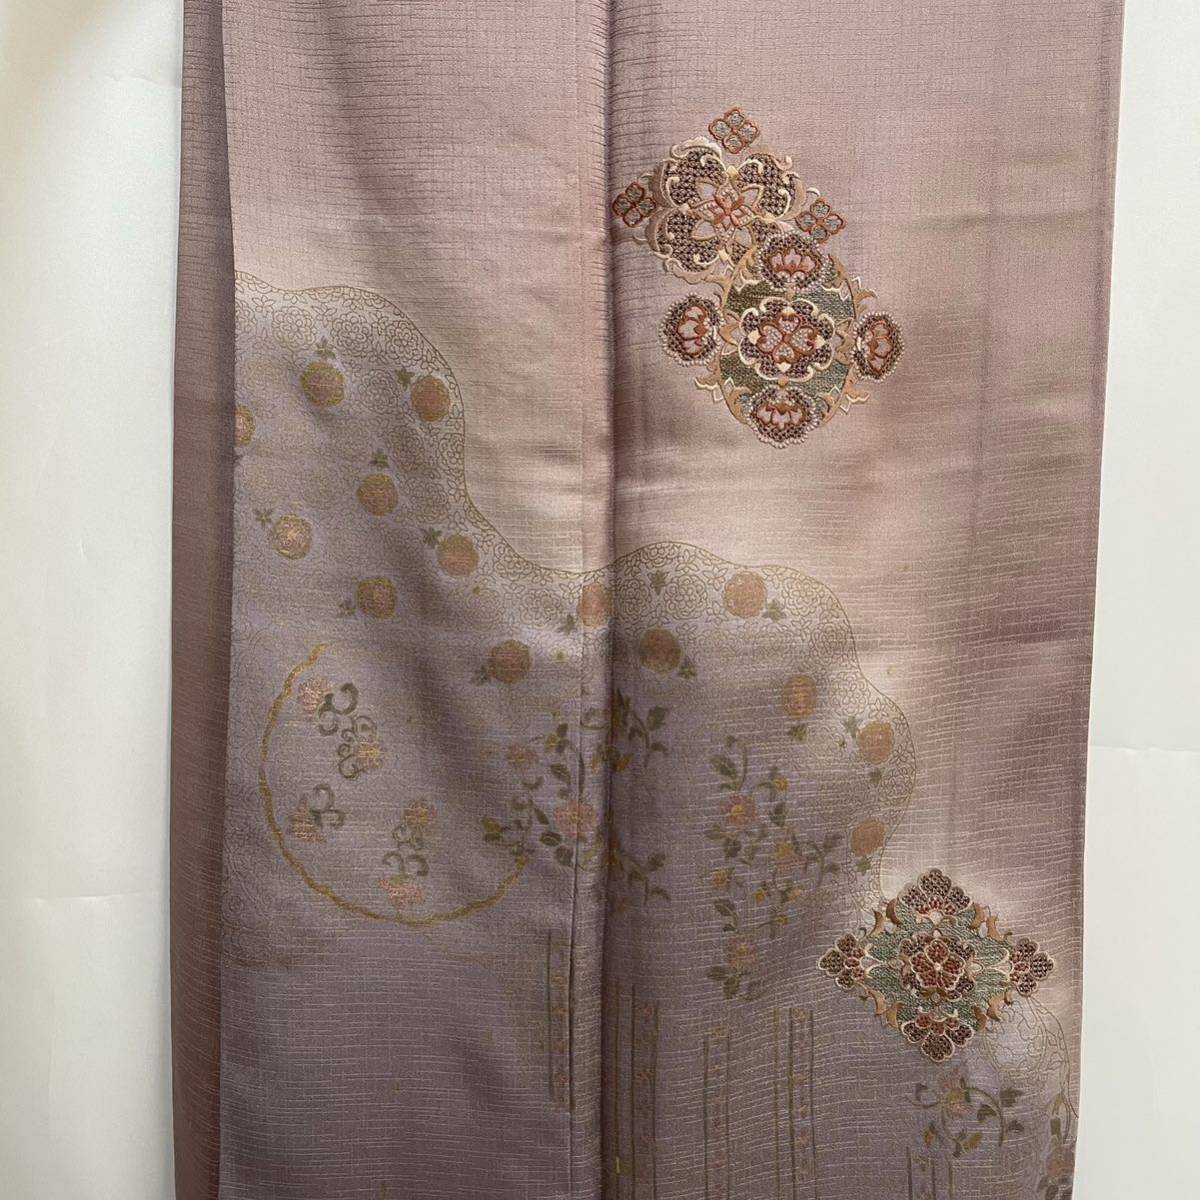 [Wellriver]swatou embroidery attaching lowering gold paint processing .. floral print on goods high class silk length 168cm formal Japanese clothes Japanese clothes #C644.